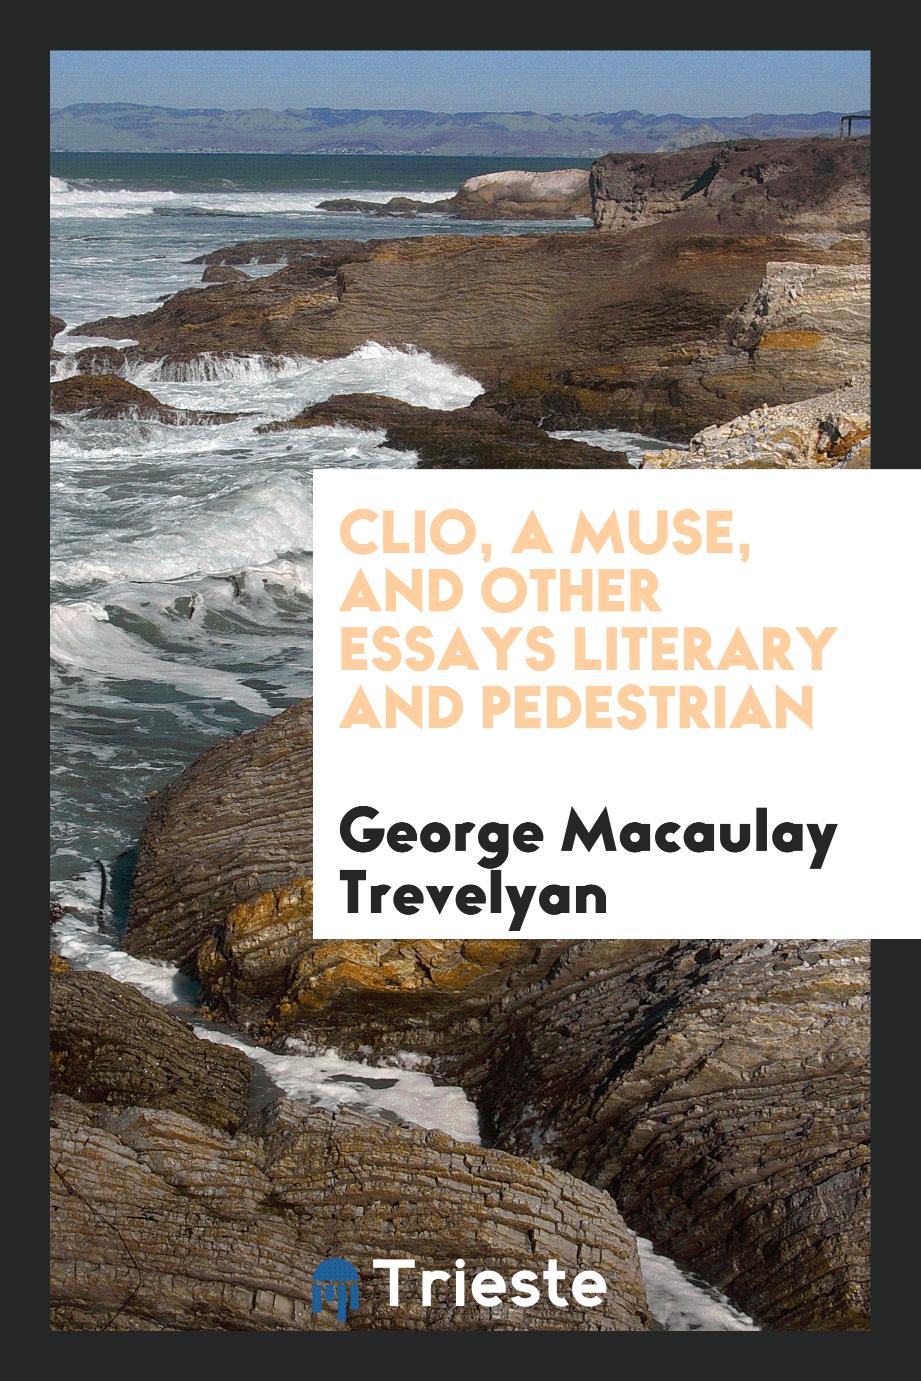 Clio, a muse, and other essays literary and pedestrian